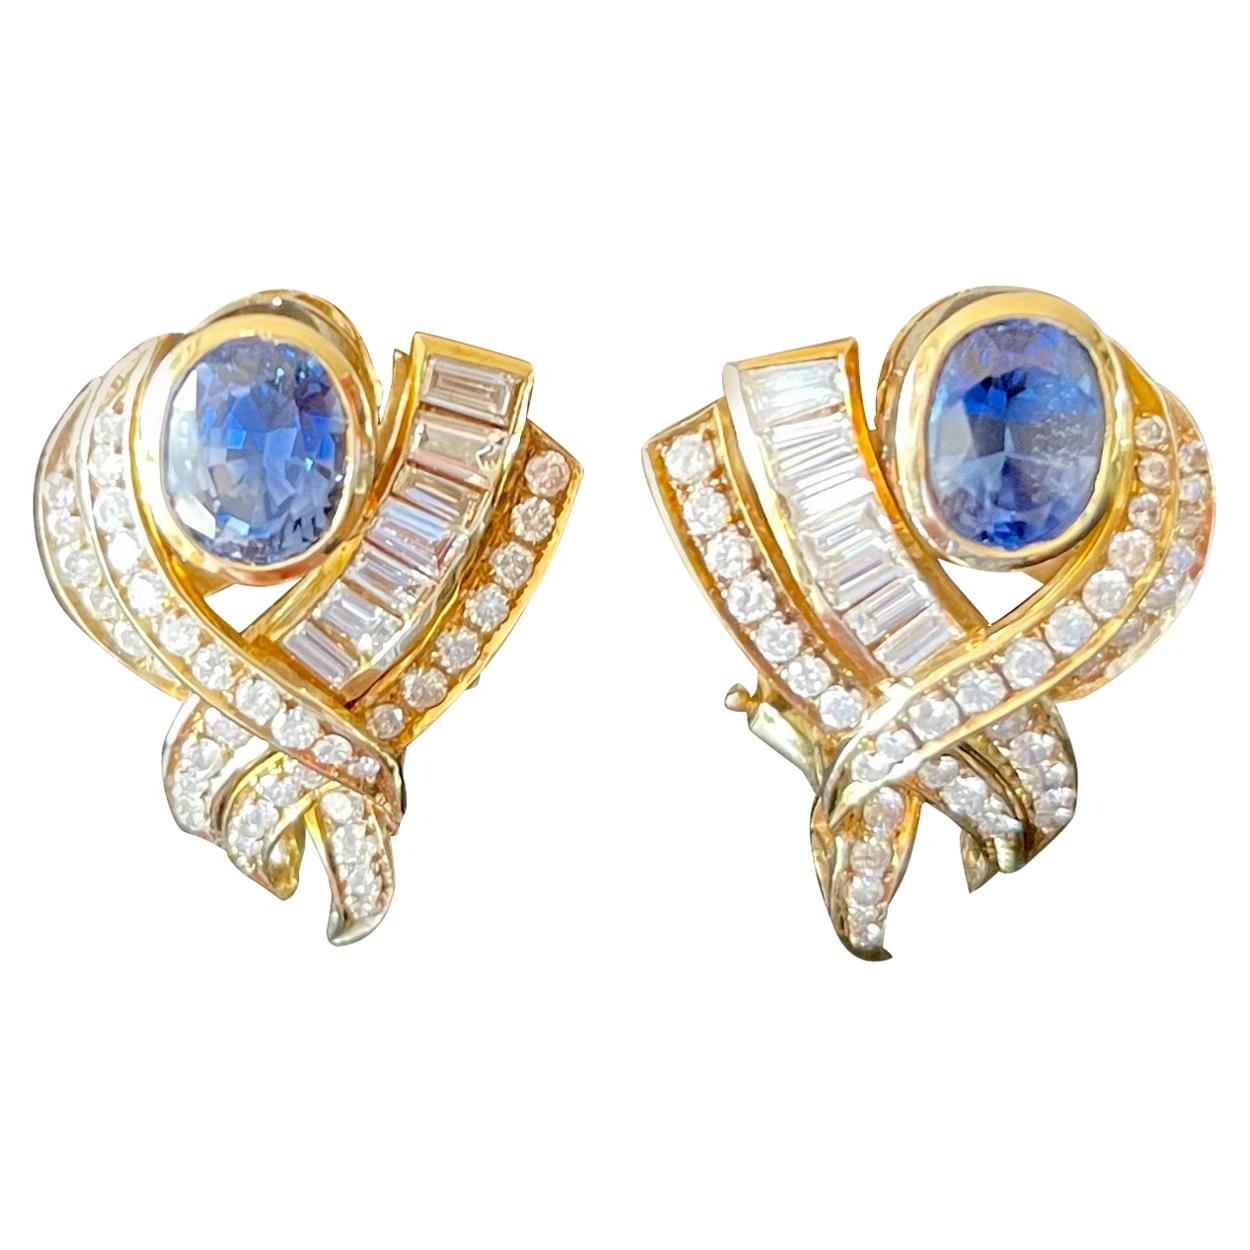 Captivating cockatail earclipsin 14 K yellow Gold featuring 2 lovely blue bezel set oval Sapphires weighing approximately 3.60 ct framed by Baguette and Brilliant cut Diamonds weighing approximately 4 ct. 
Images do not always reflect the true color